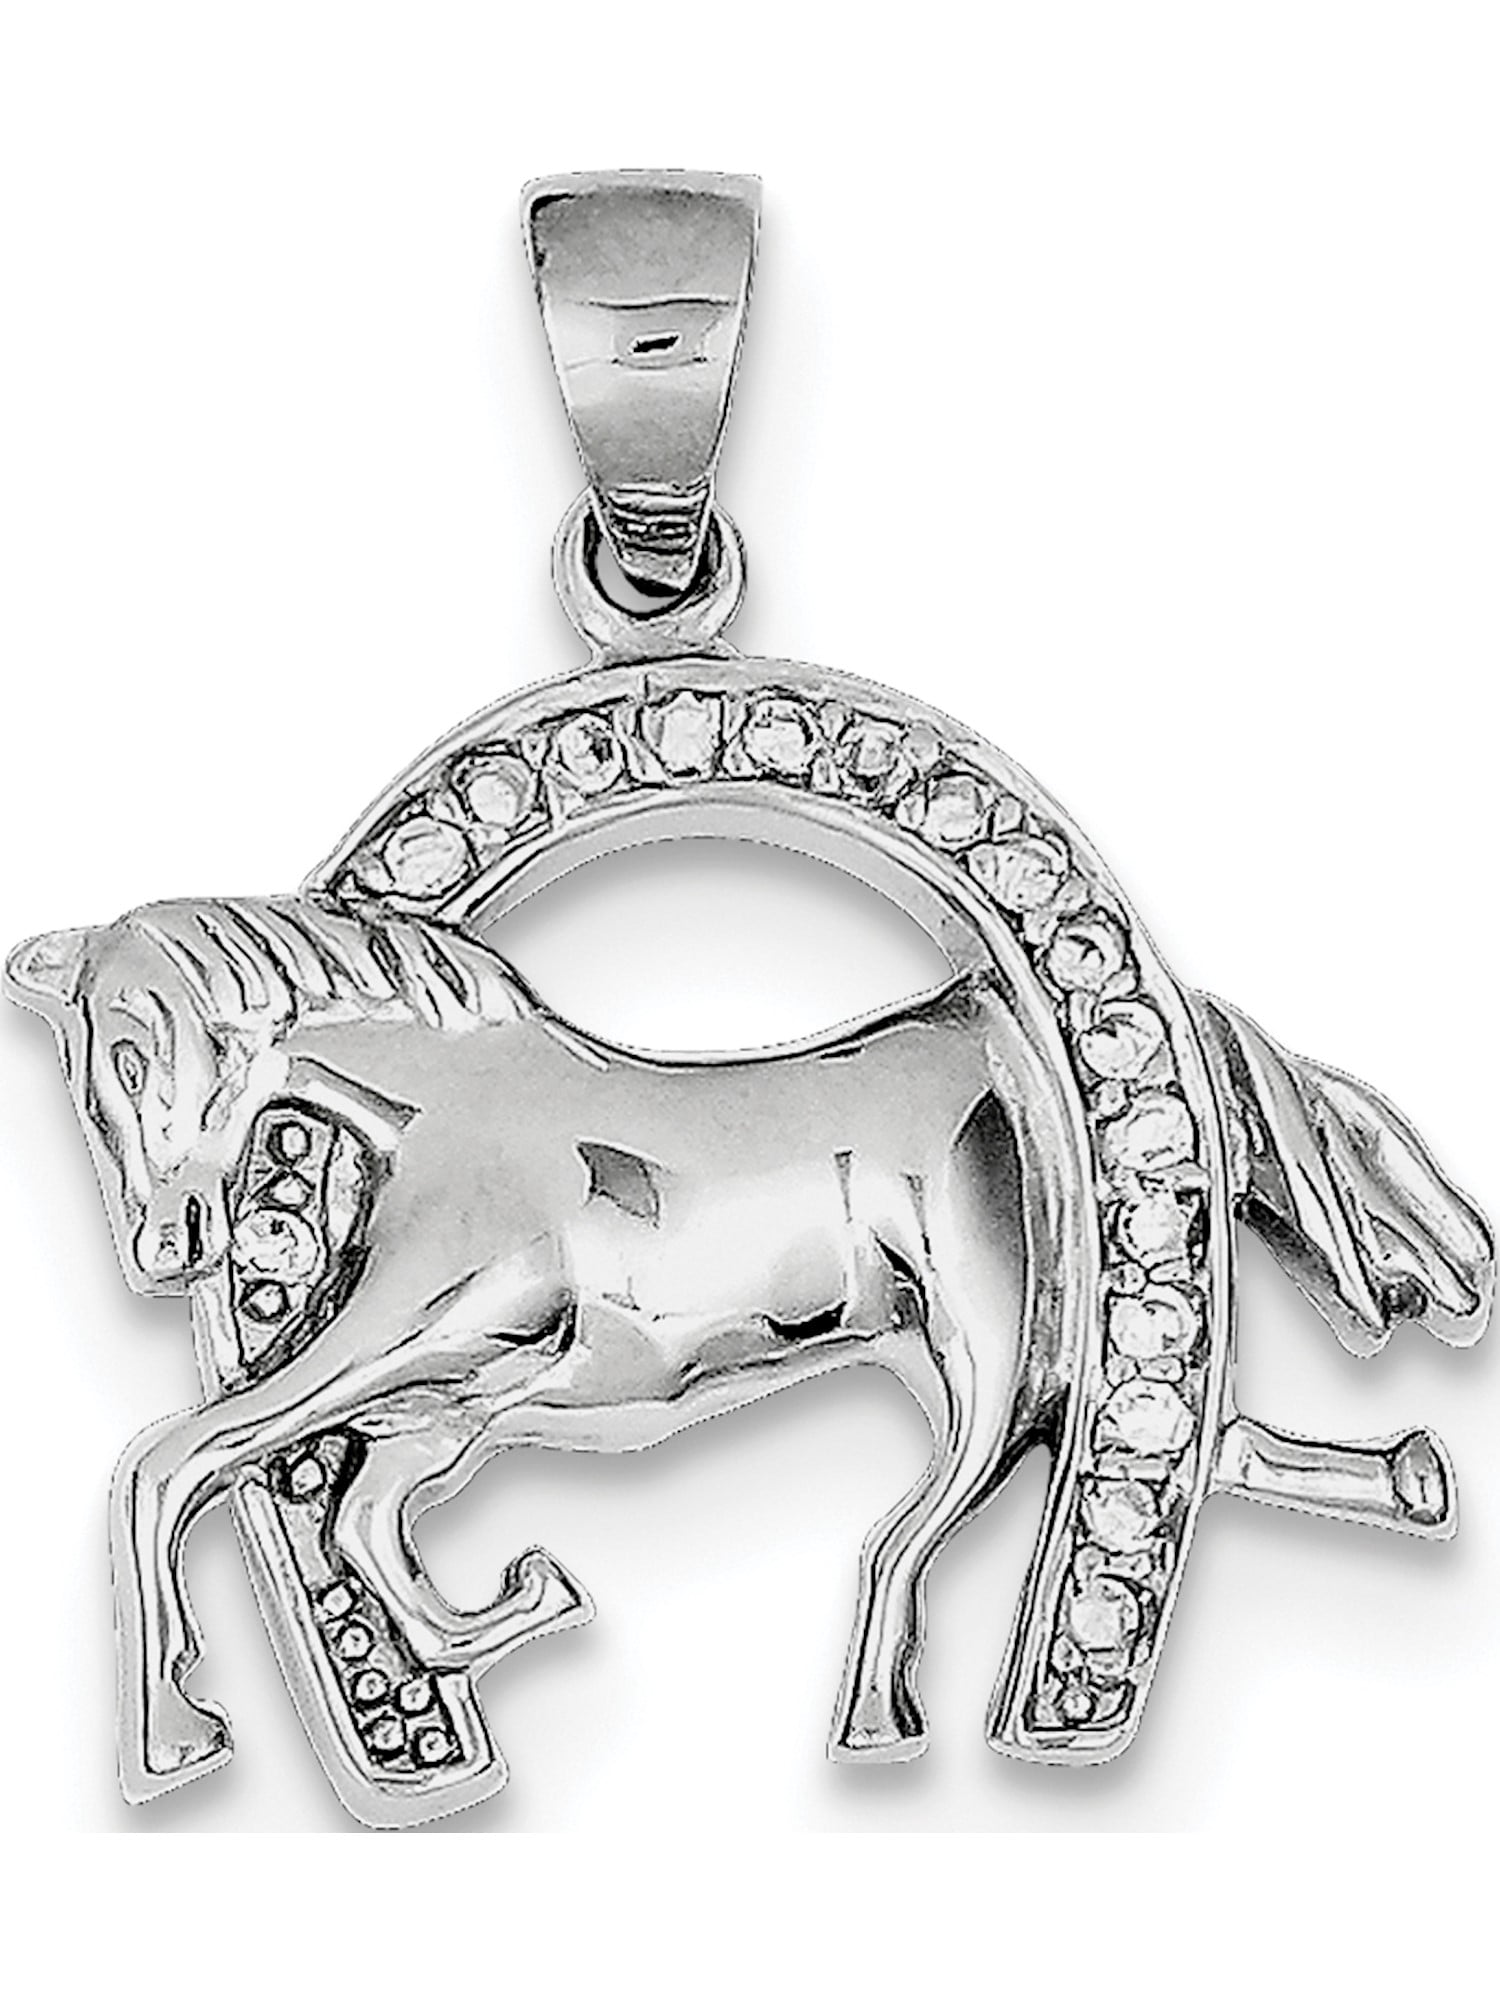 Details about   Polished Rhodium Plated 925 Sterling Silver Polished Horse Charm Pendant 